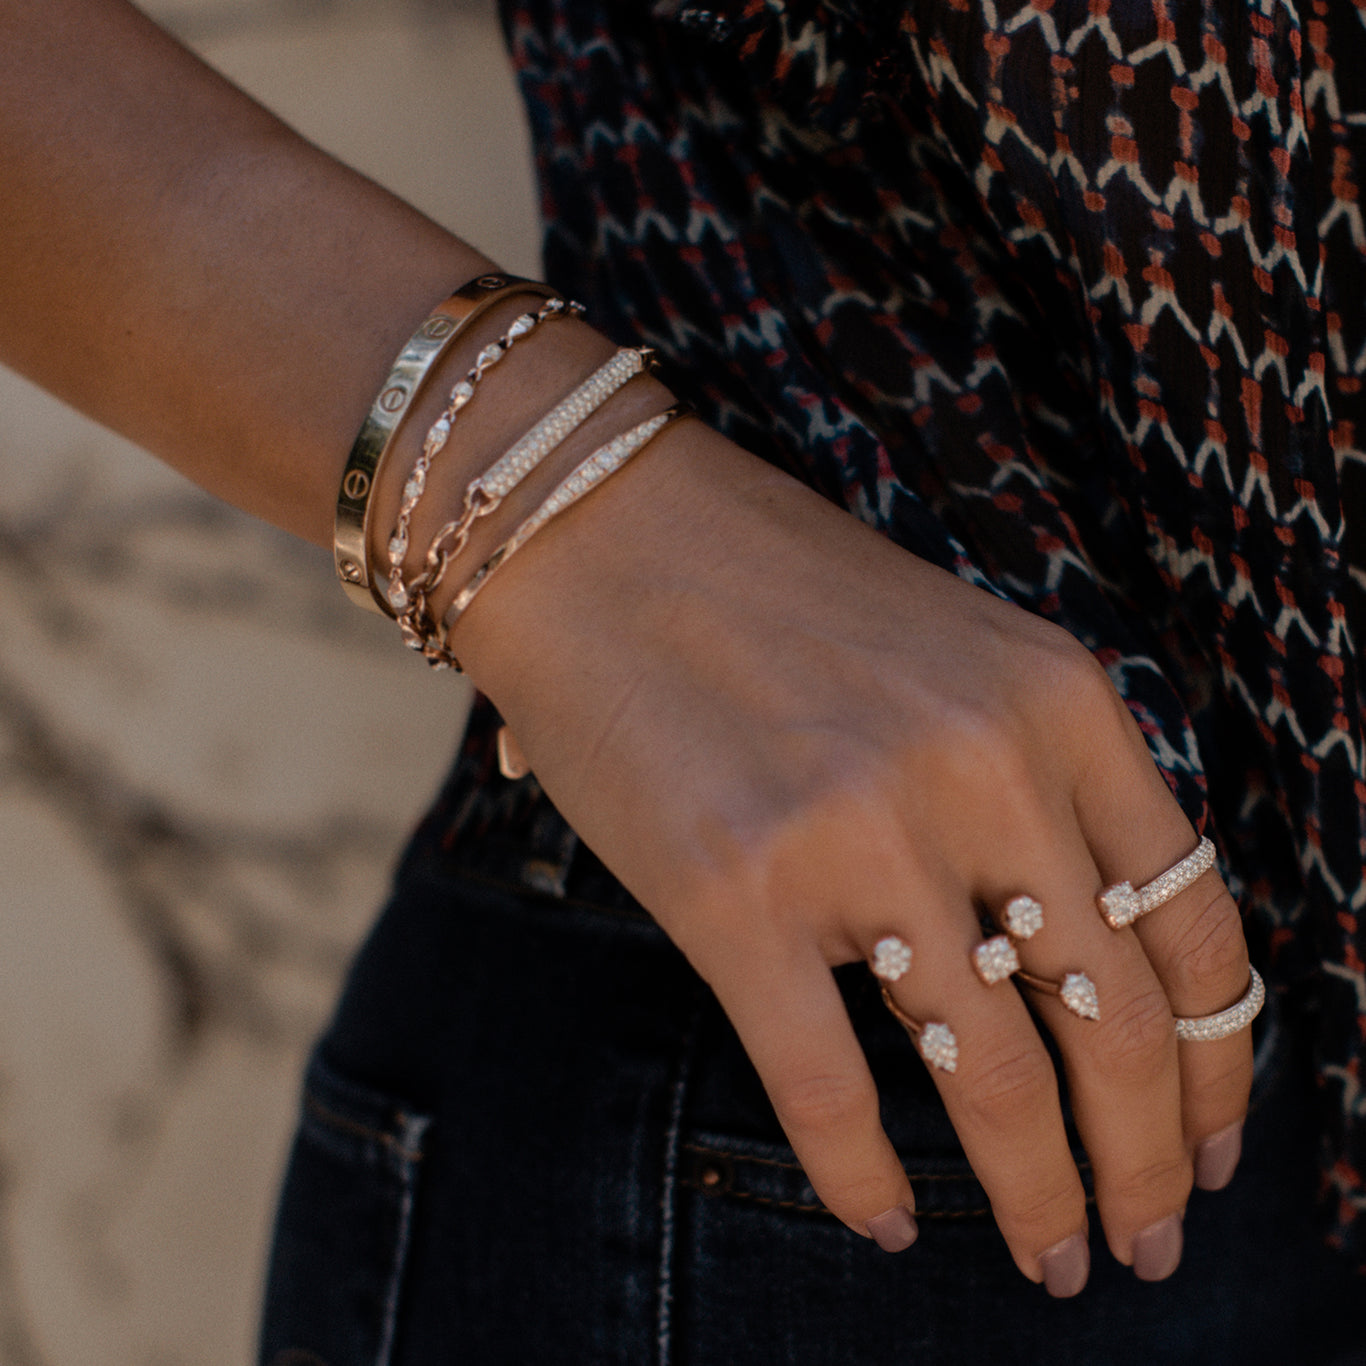 The Marquise Bangle, Amalfi Bracelet, and Pantheon Bracelet shown stacked together. On the hand, the model is wearing Throne Rings and an Olympus Ring.